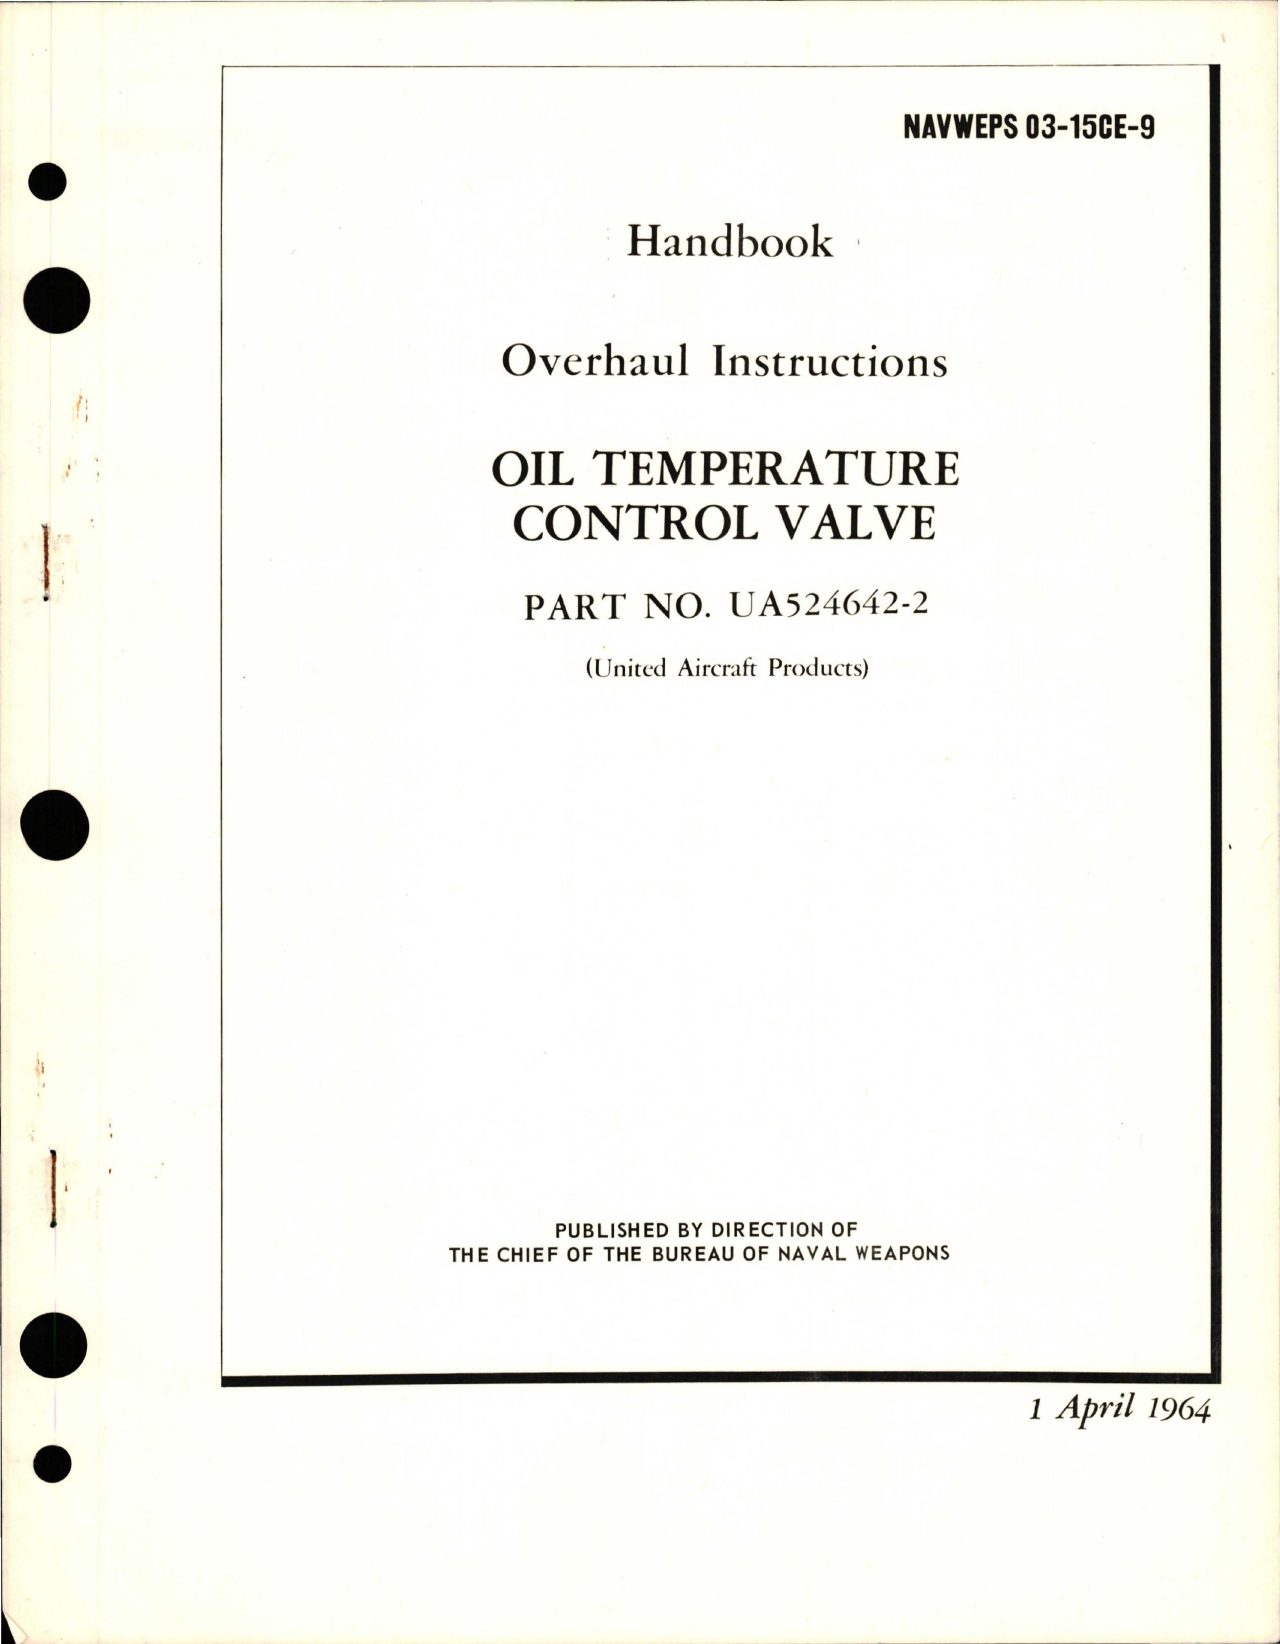 Sample page 1 from AirCorps Library document: Overhaul Instructions for Oil Temperature Control Valve - Part UA524642-2